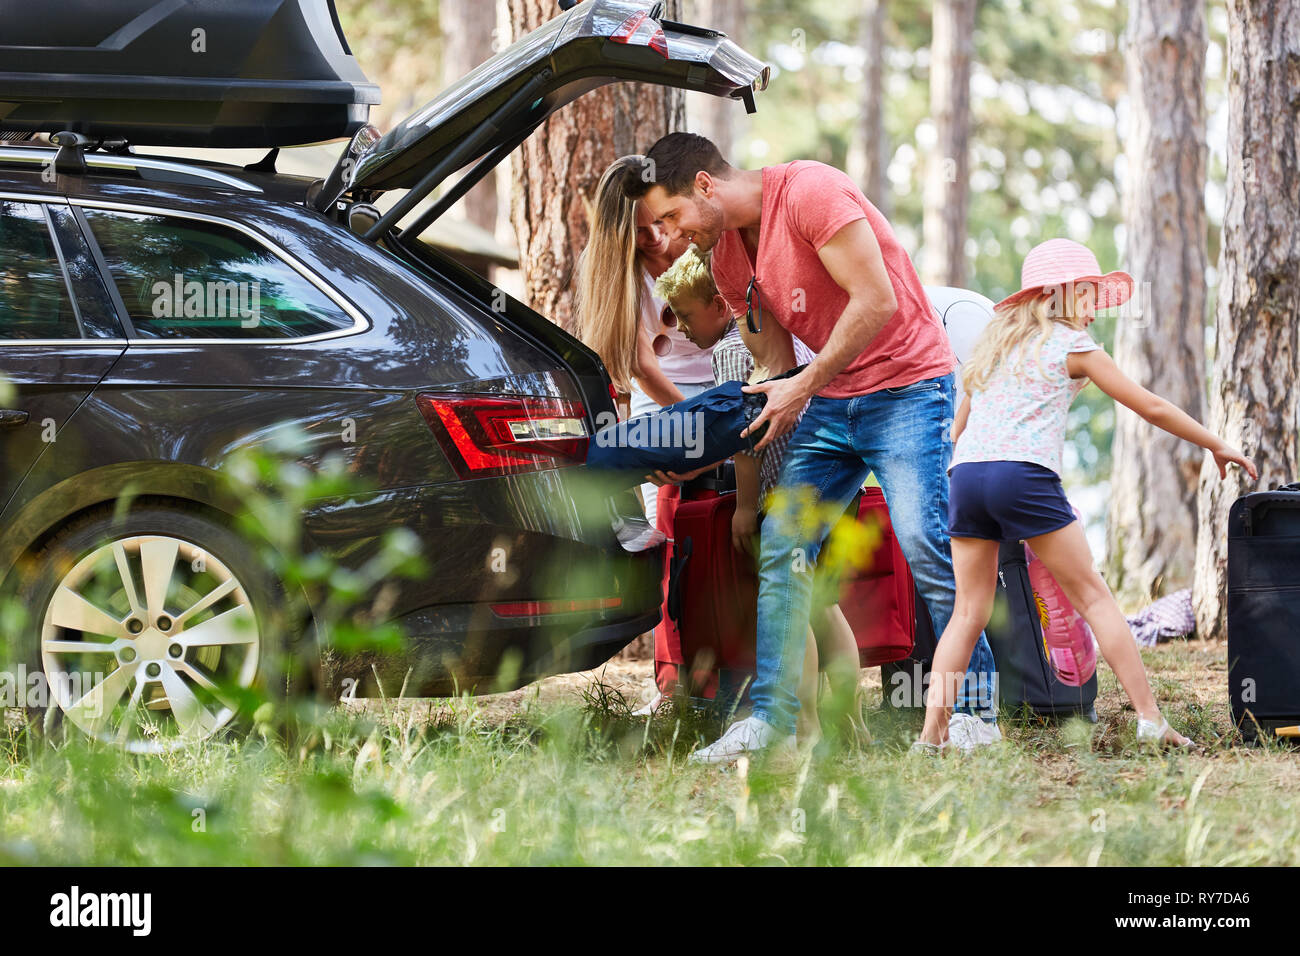 Family at the car loading from the trunk with luggage before traveling Stock Photo